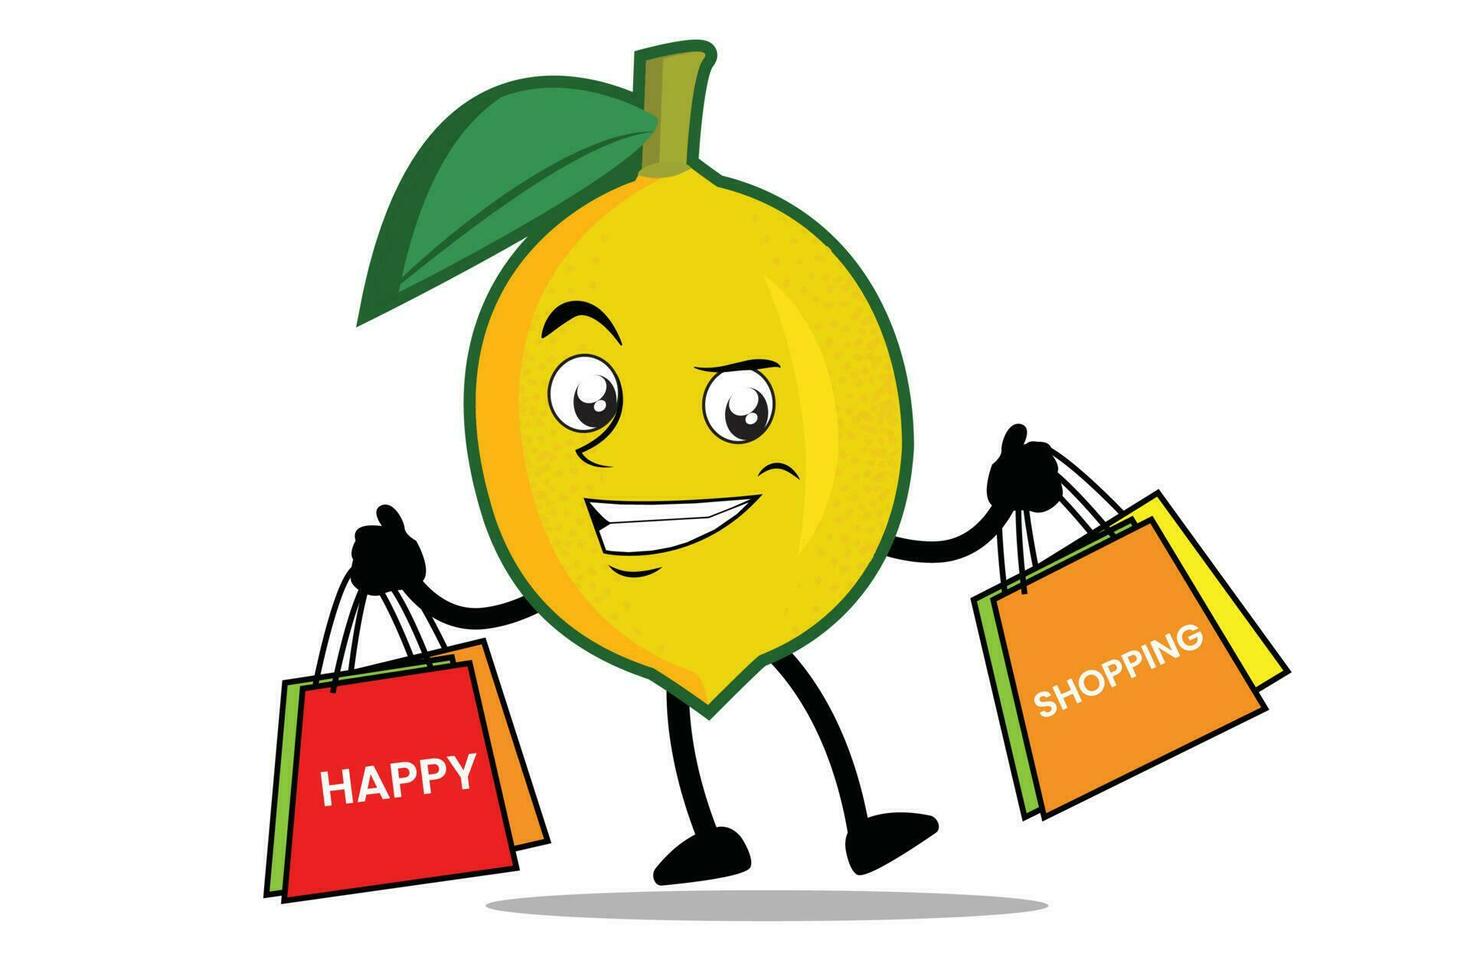 Cartoon mascot or character carry grocery bags and enjoy shopping vector